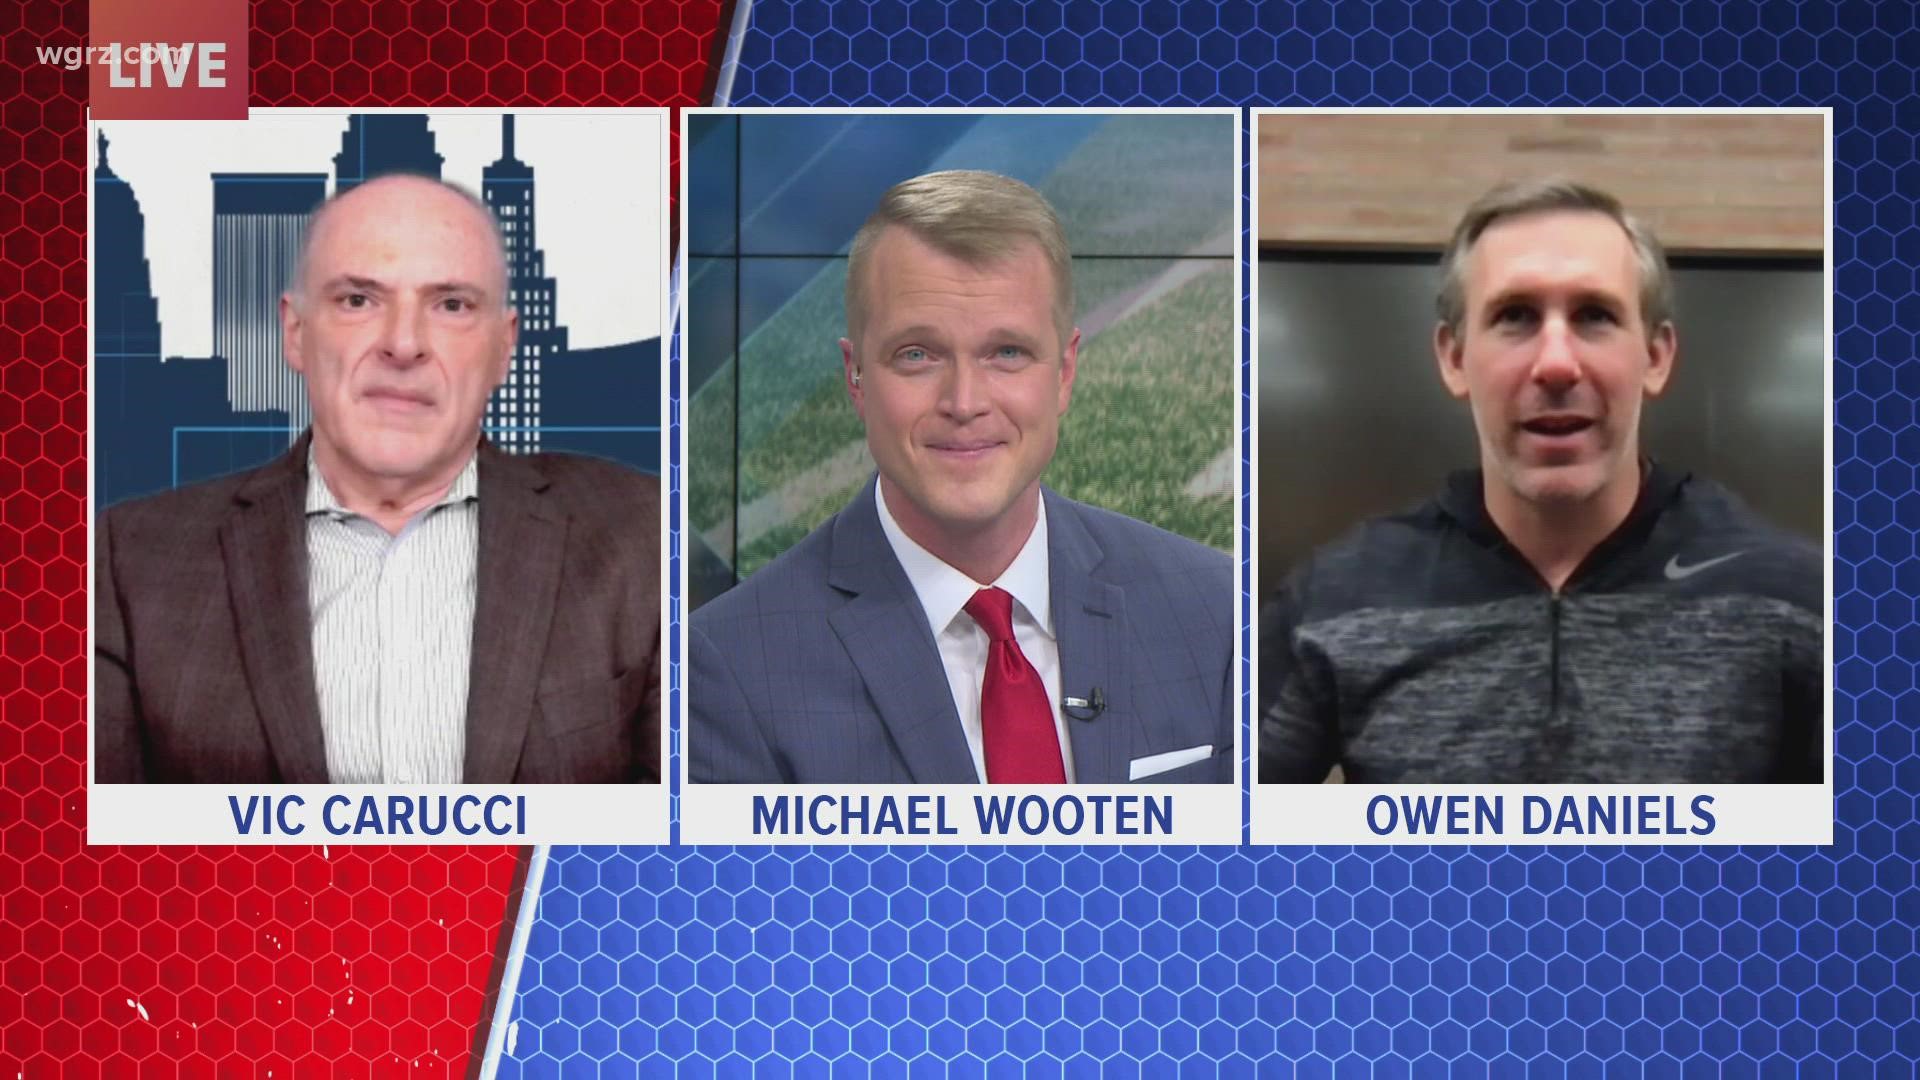 Vic Carucci and Owen Daniels joined the Town Hall to give insight on the Bills-Patriots matchup and what the cold weather means for this AFC wild card game.